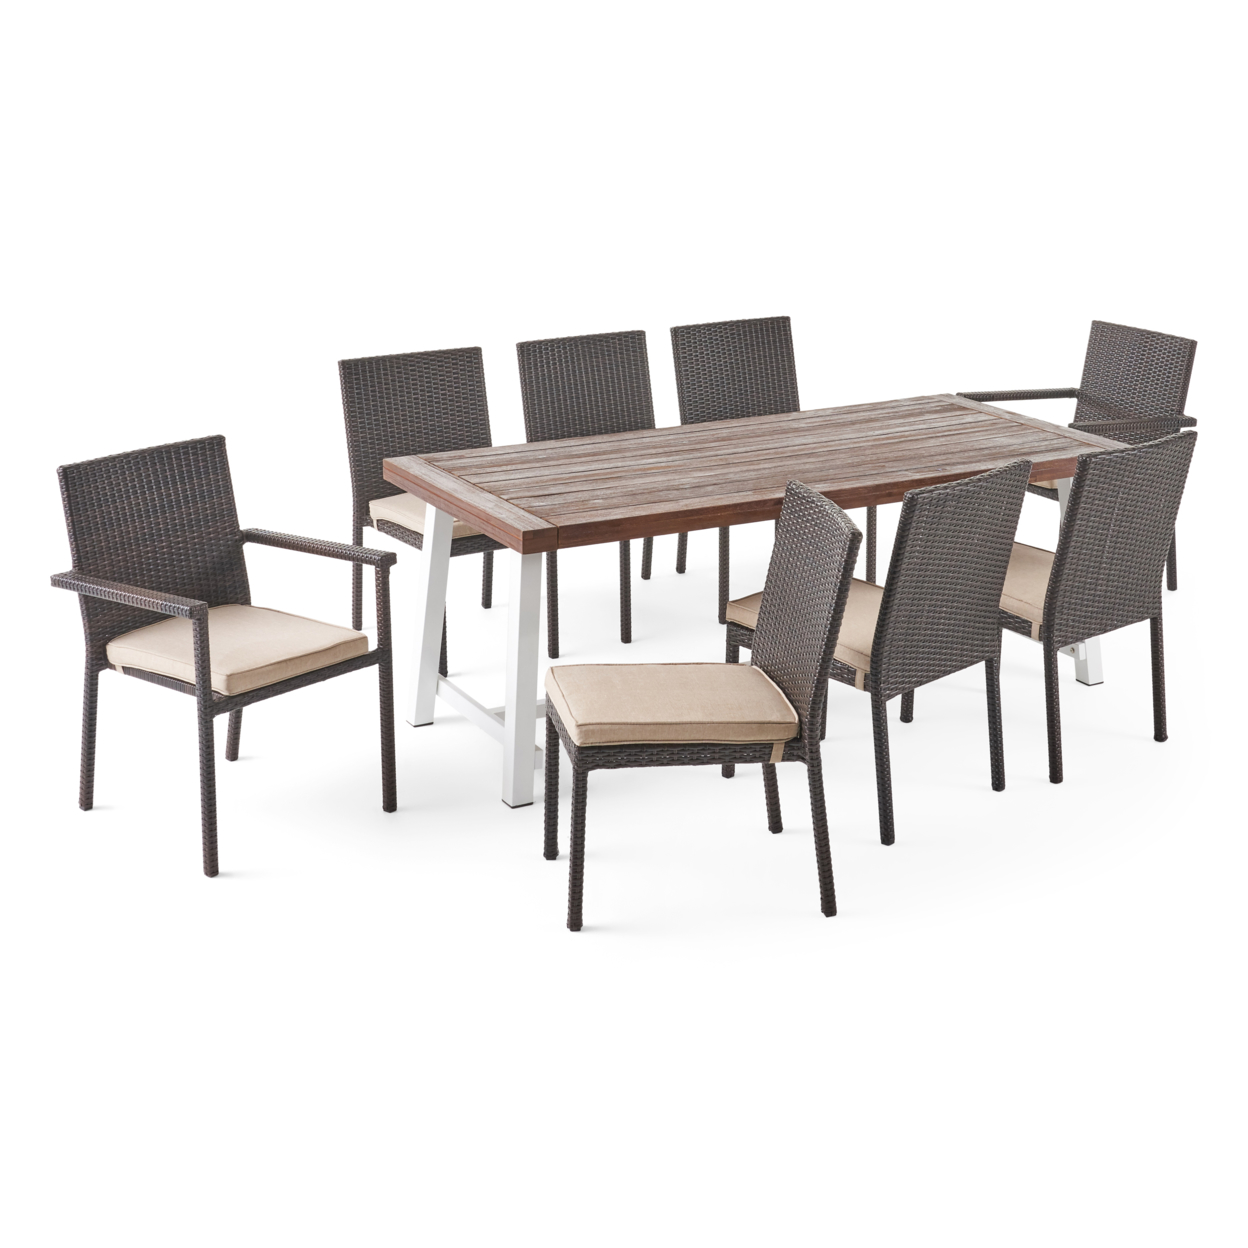 Kylen Outdoor Wood And Wicker 8 Seater Dining Set